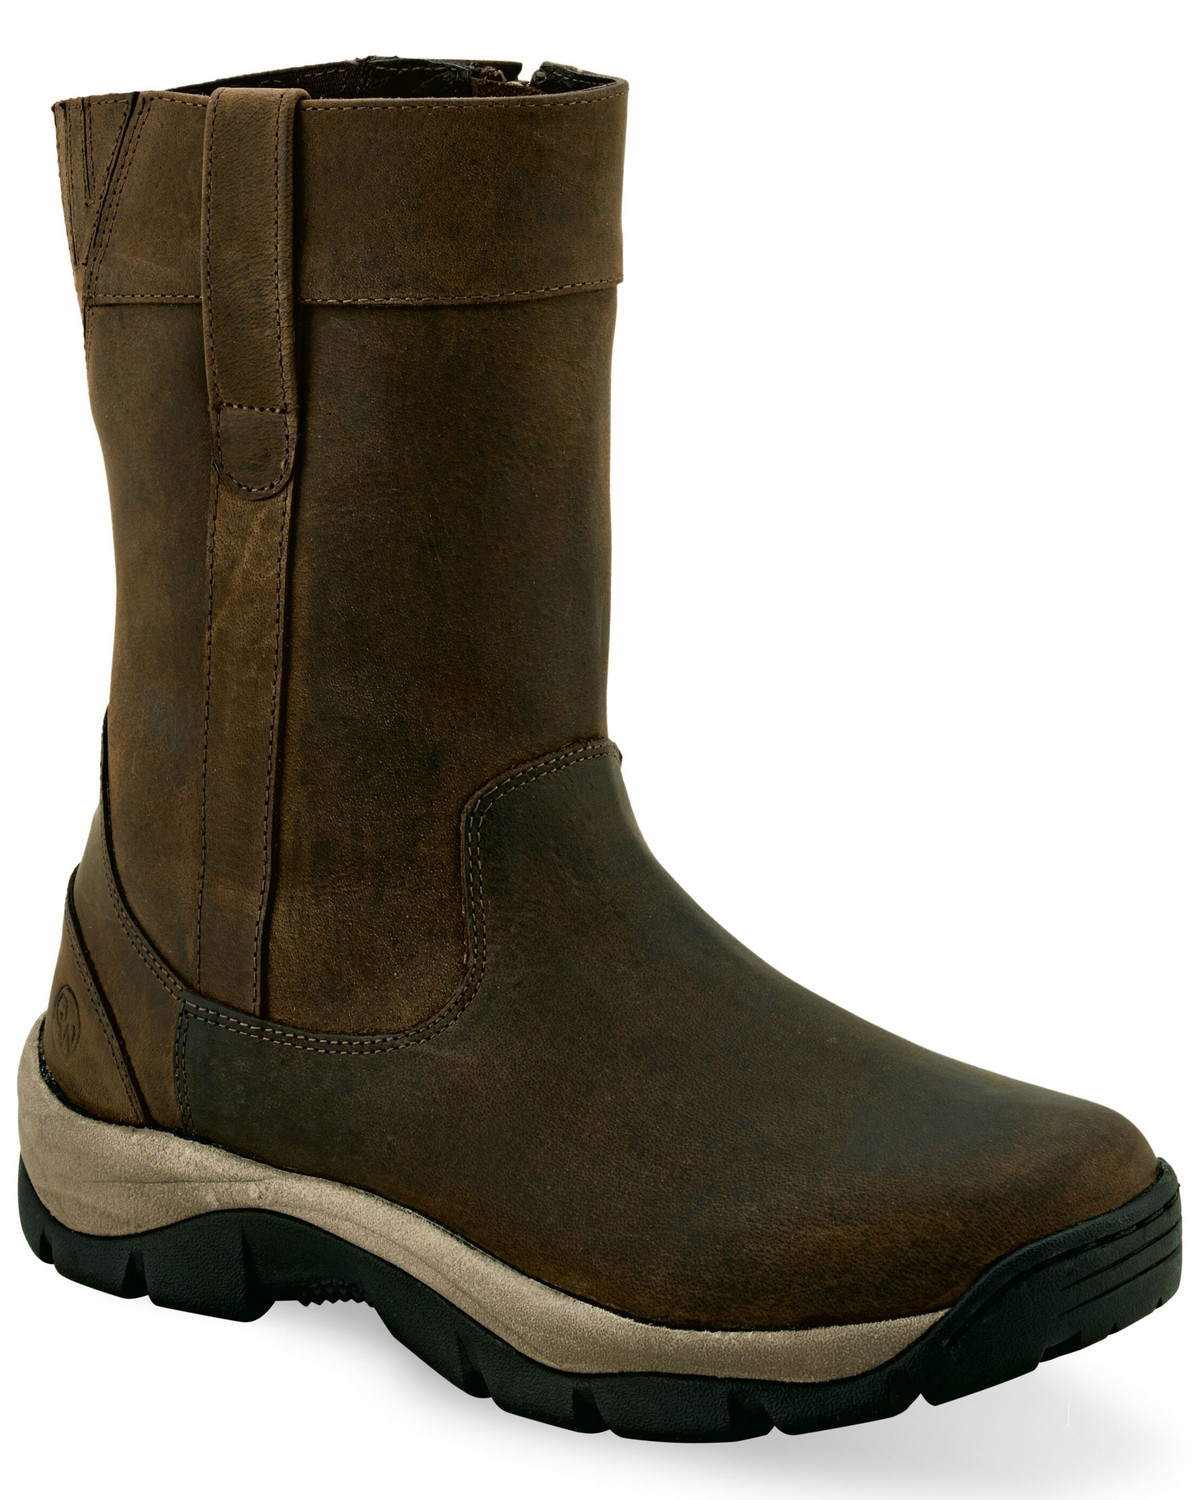 mens boots with zipper on side